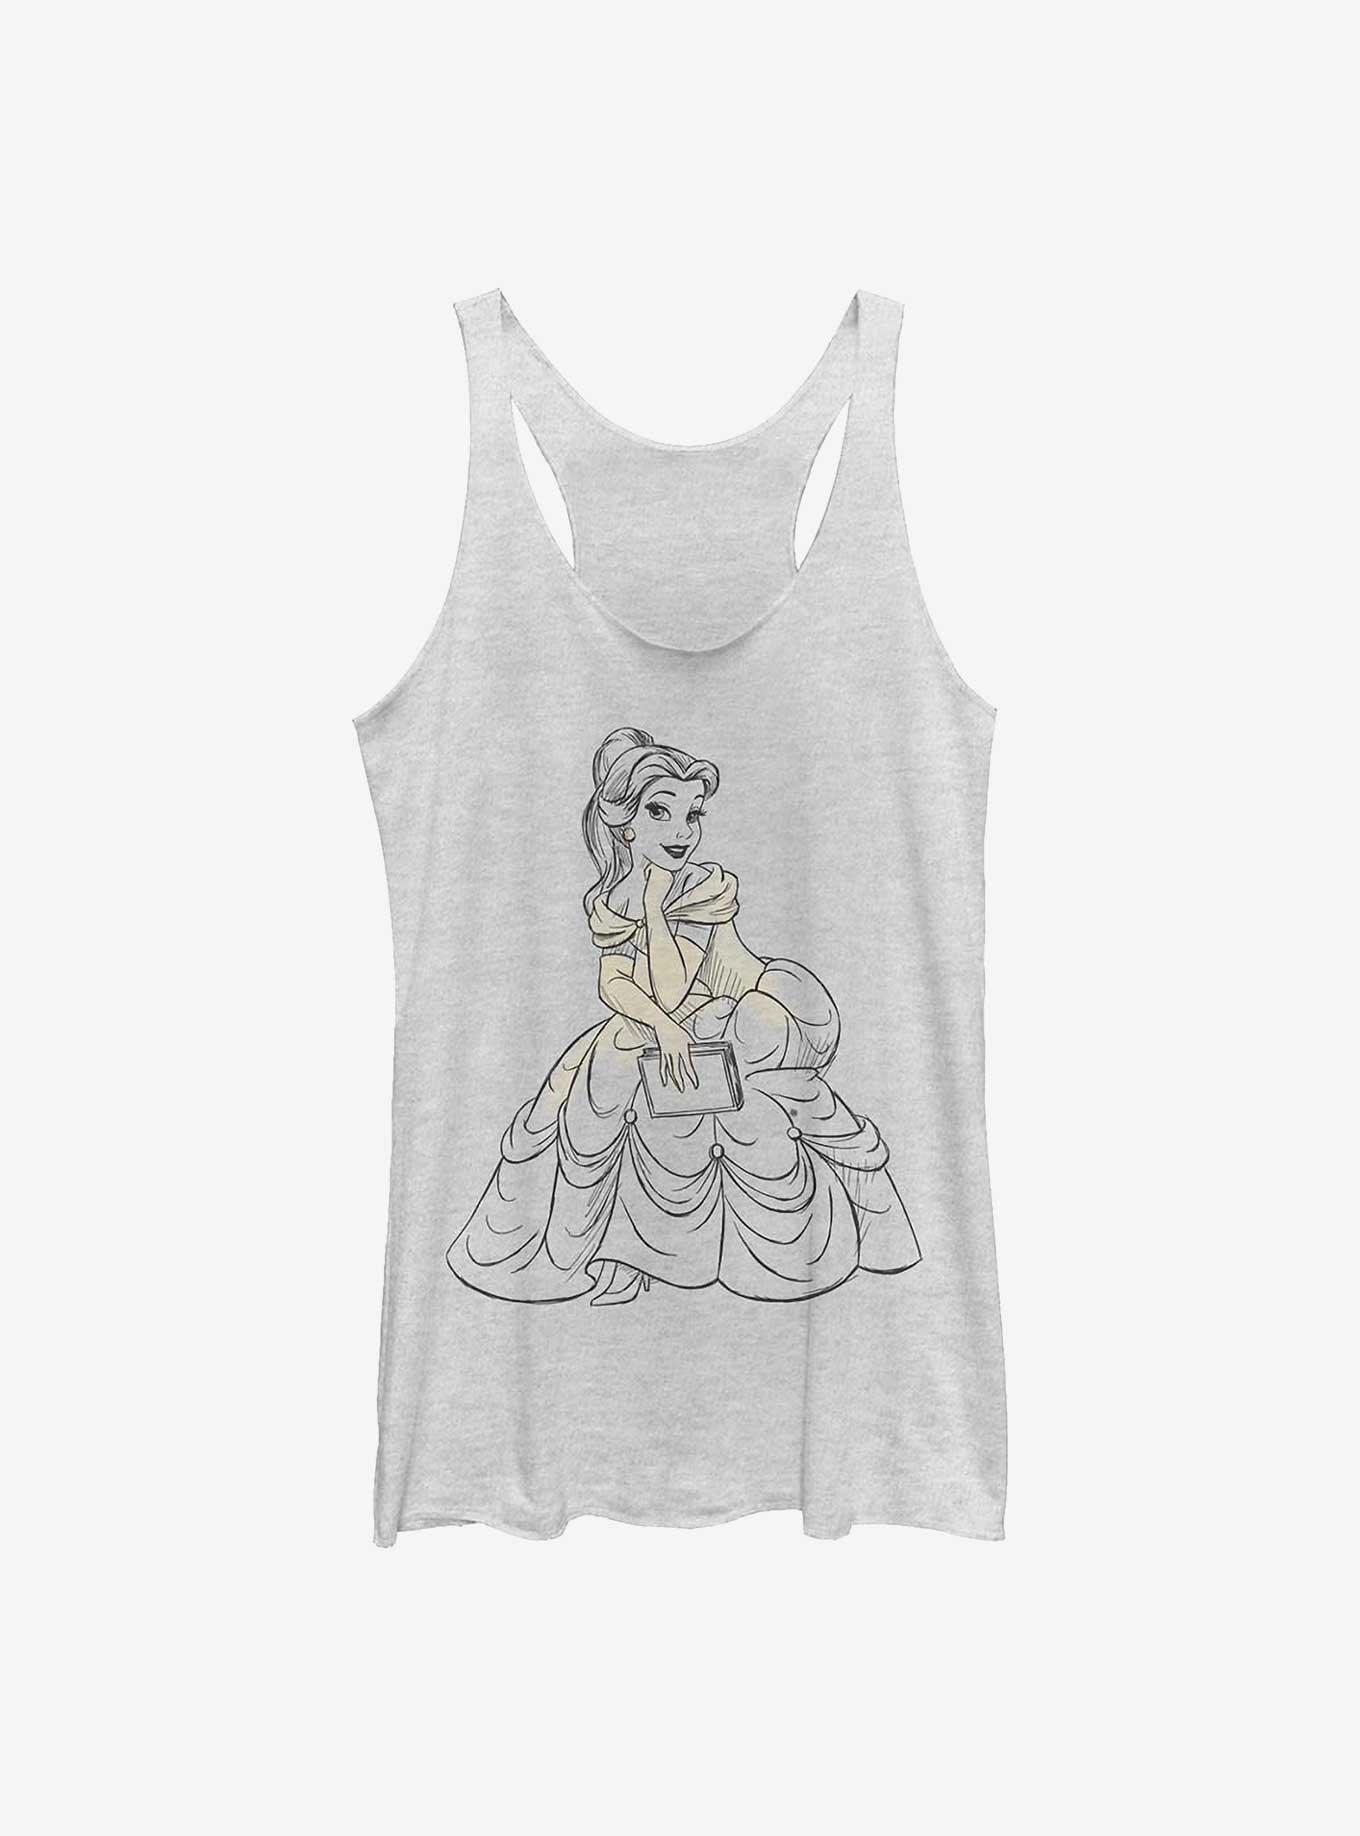 Disney Beauty and the Beast Sketchy Belle Girls Tank, WHITE HTR, hi-res